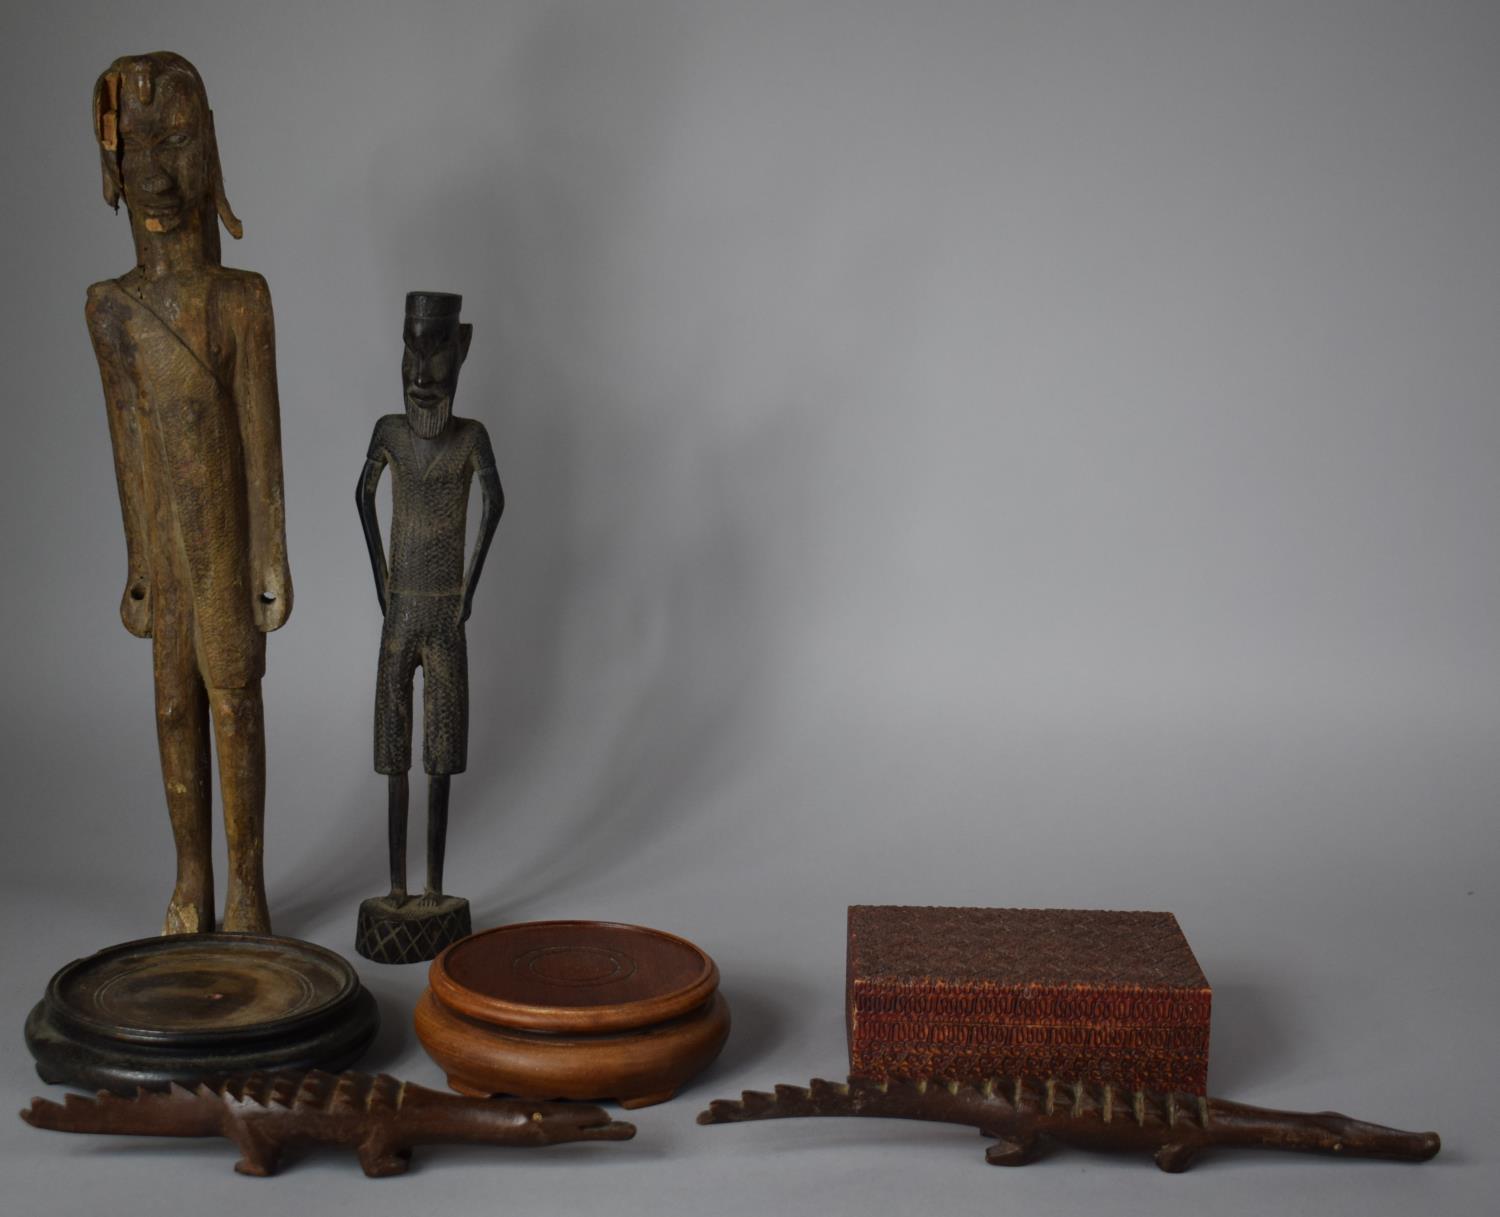 A Collection of Carved Wooden Tribal and Souvenir Ornaments, Two Oriental Stands and a Wooden